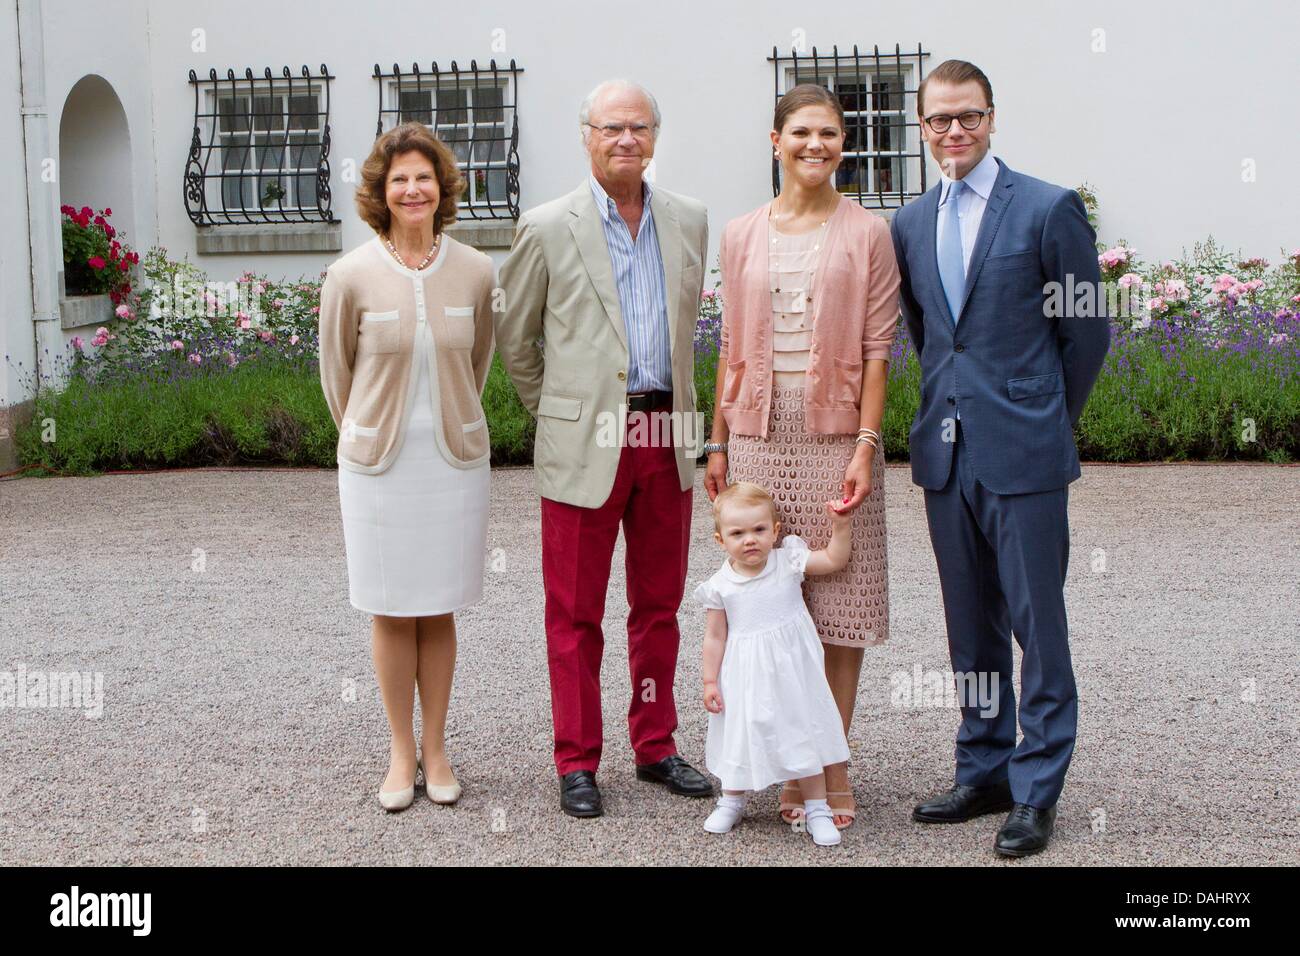 Island Oland, Sweden. 14th July, 2013. the L-R: Queen Silvia, King Carl Gustav, crown princess Victoria, prince Daniel and princess Estelle celebrate the 36th birthday of crown princess Victoria at the courtyard of the Swedish Royal Family's summer residence Solliden, on the Island Oland, Sweden, 14 July 2013. Photo: Patrick van Katwijk / NETHERLANDS AND FRANCE; OUT/dpa/Alamy Live News / /dpa/Alamy Live News Stock Photo